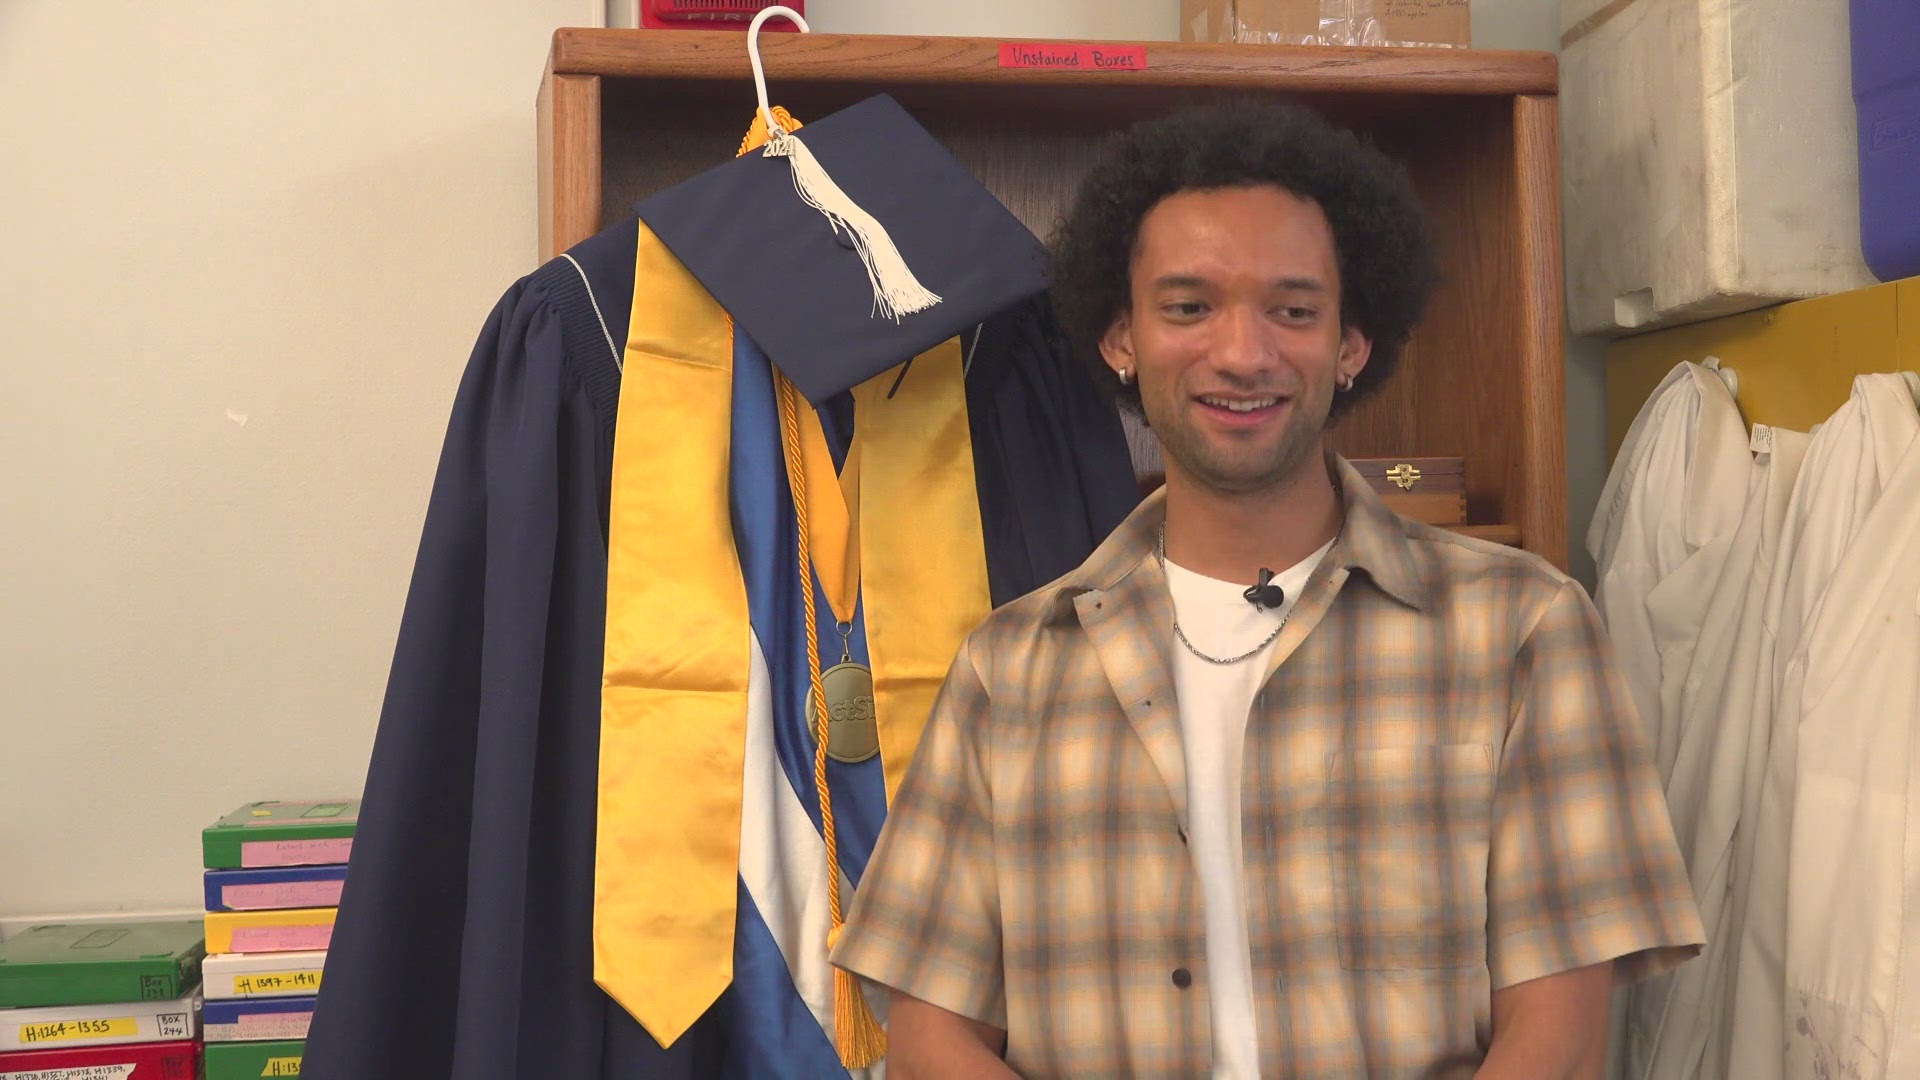 Micah Bell graduated University High School in 2020 and finally gets the satisfaction of walking across stage after graduating from Gonzaga.